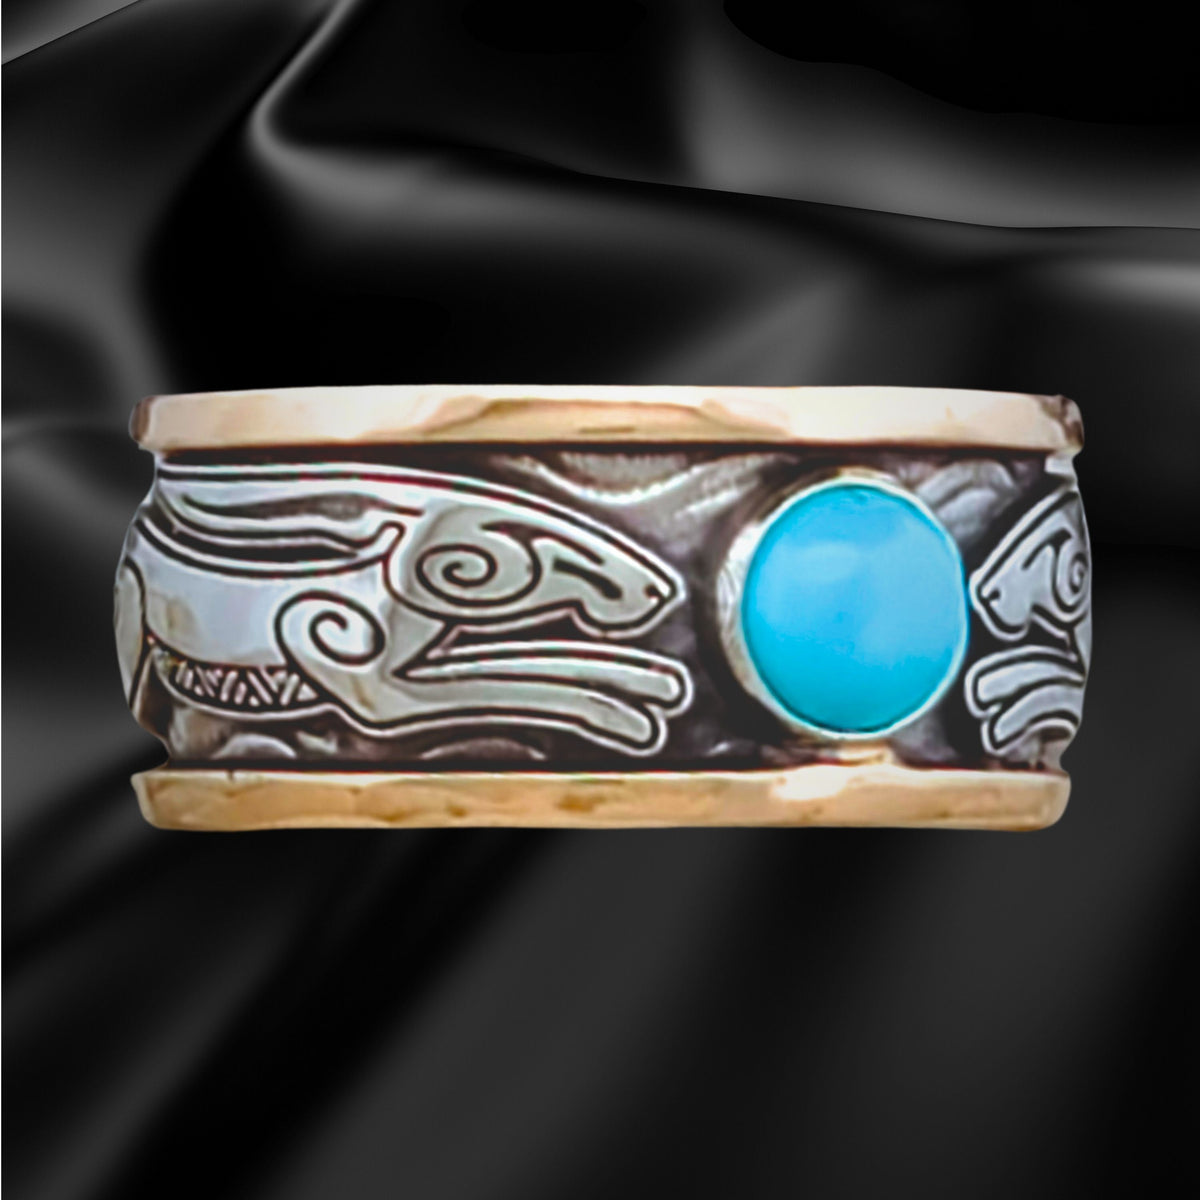 FREYJA&#39;S HARES SOLITAIRE BAND RING with TURQUOISE CABACHON 14KT 2-TONE GOLD